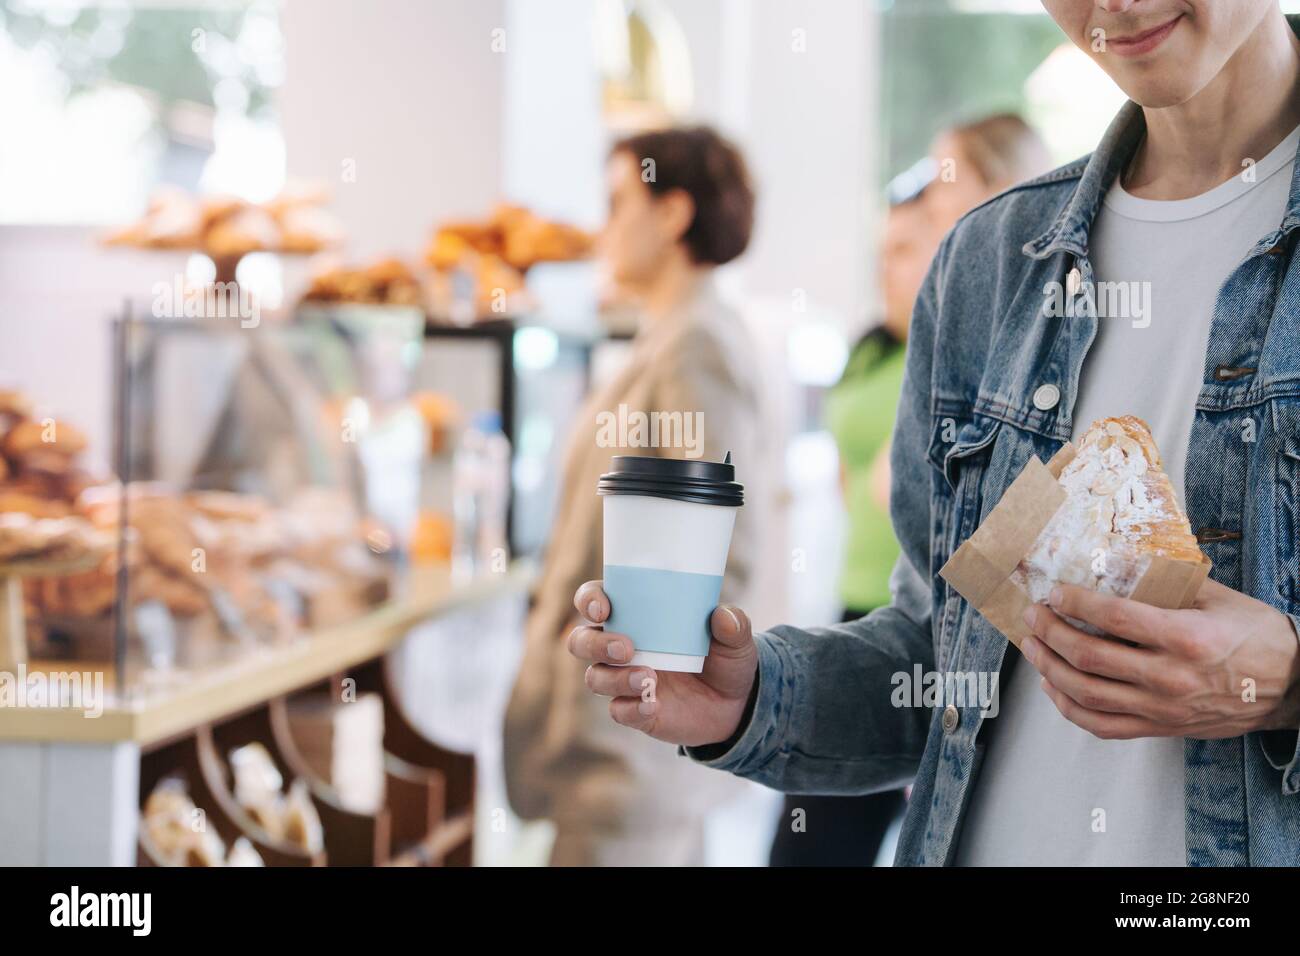 Bokeh image of a man in a jeans jacket holding cup of coffee and croissant in a paper wrap. Cropped, half face, smiling. Stock Photo